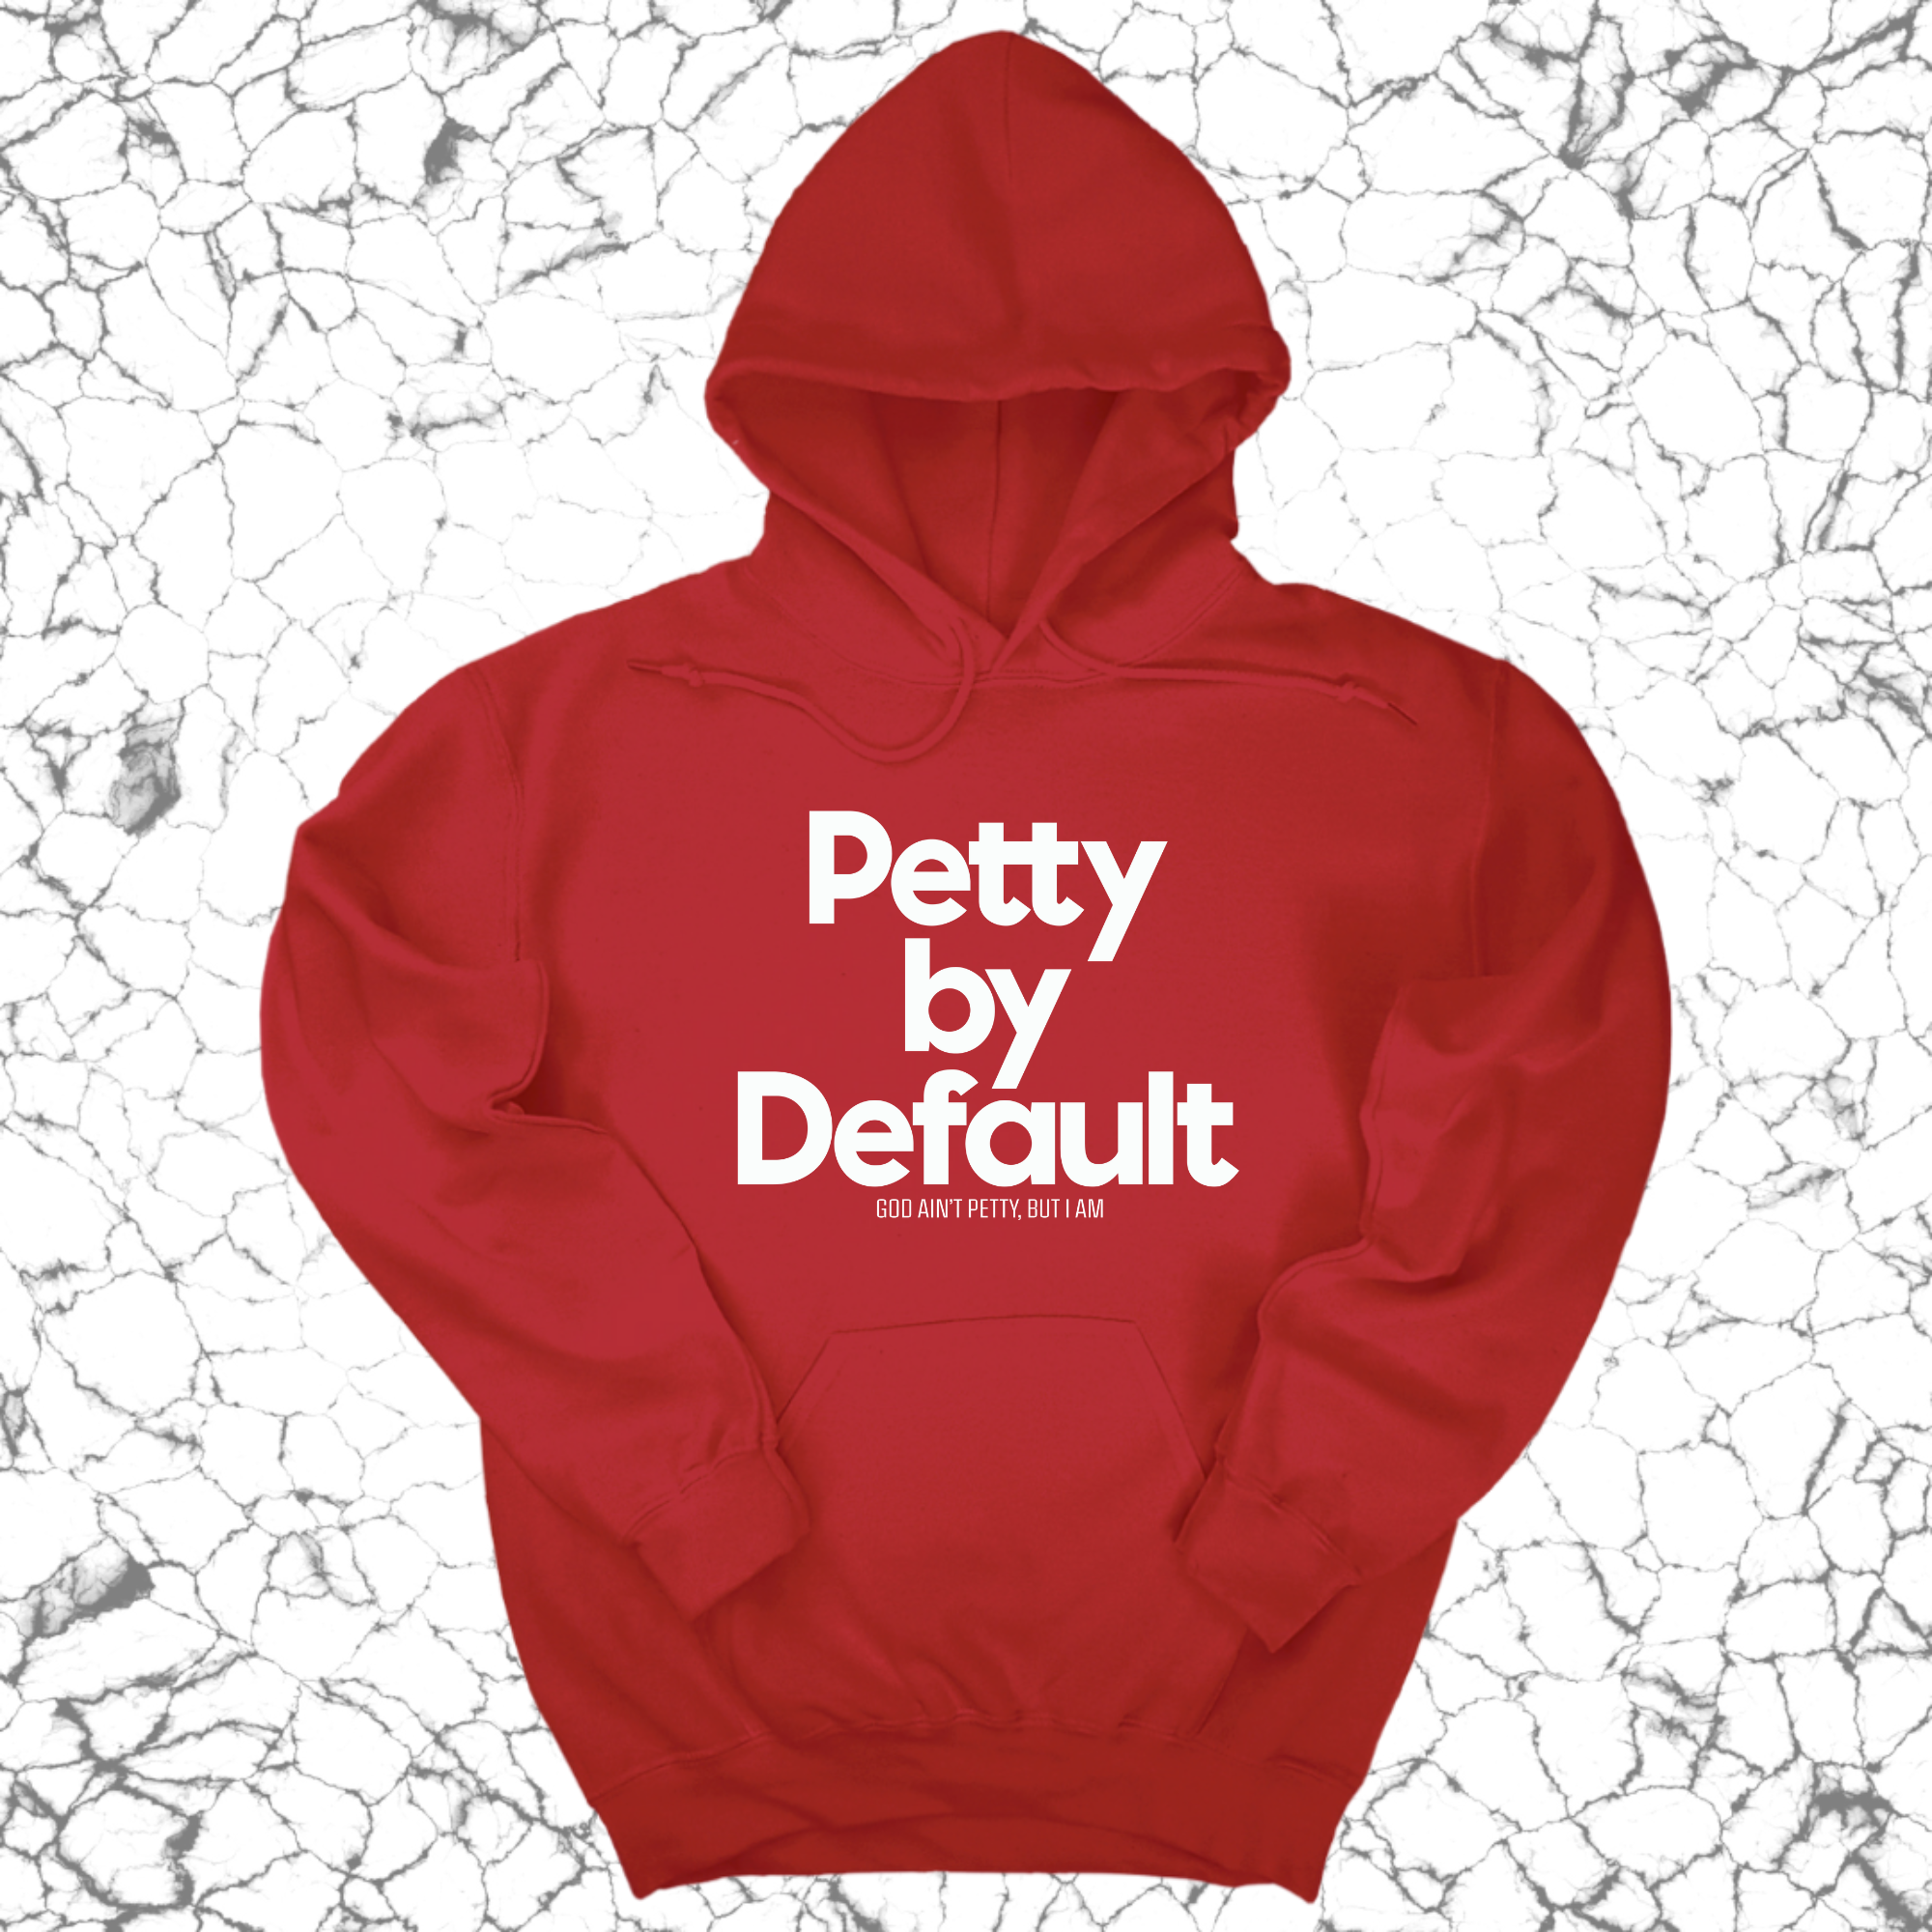 Petty by Default Unisex Hoodie-Hoodie-The Original God Ain't Petty But I Am